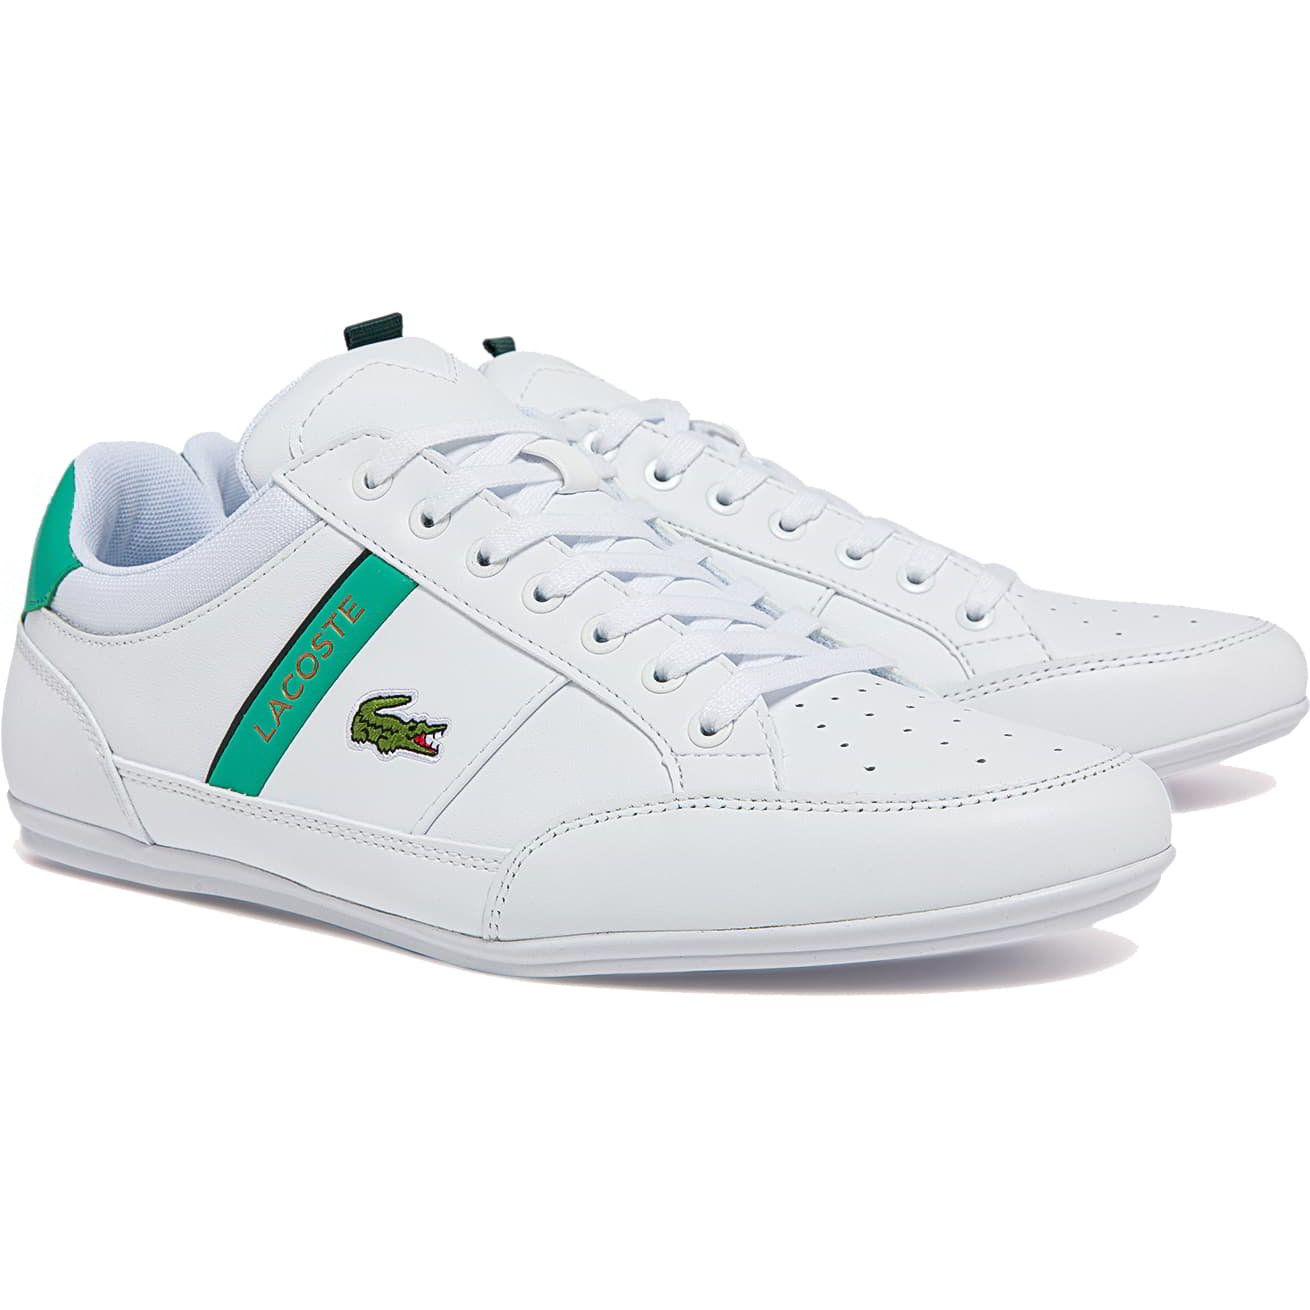 Lacoste Mens Chaymon 722-1 Leather Trainers - UK 9 White 2951